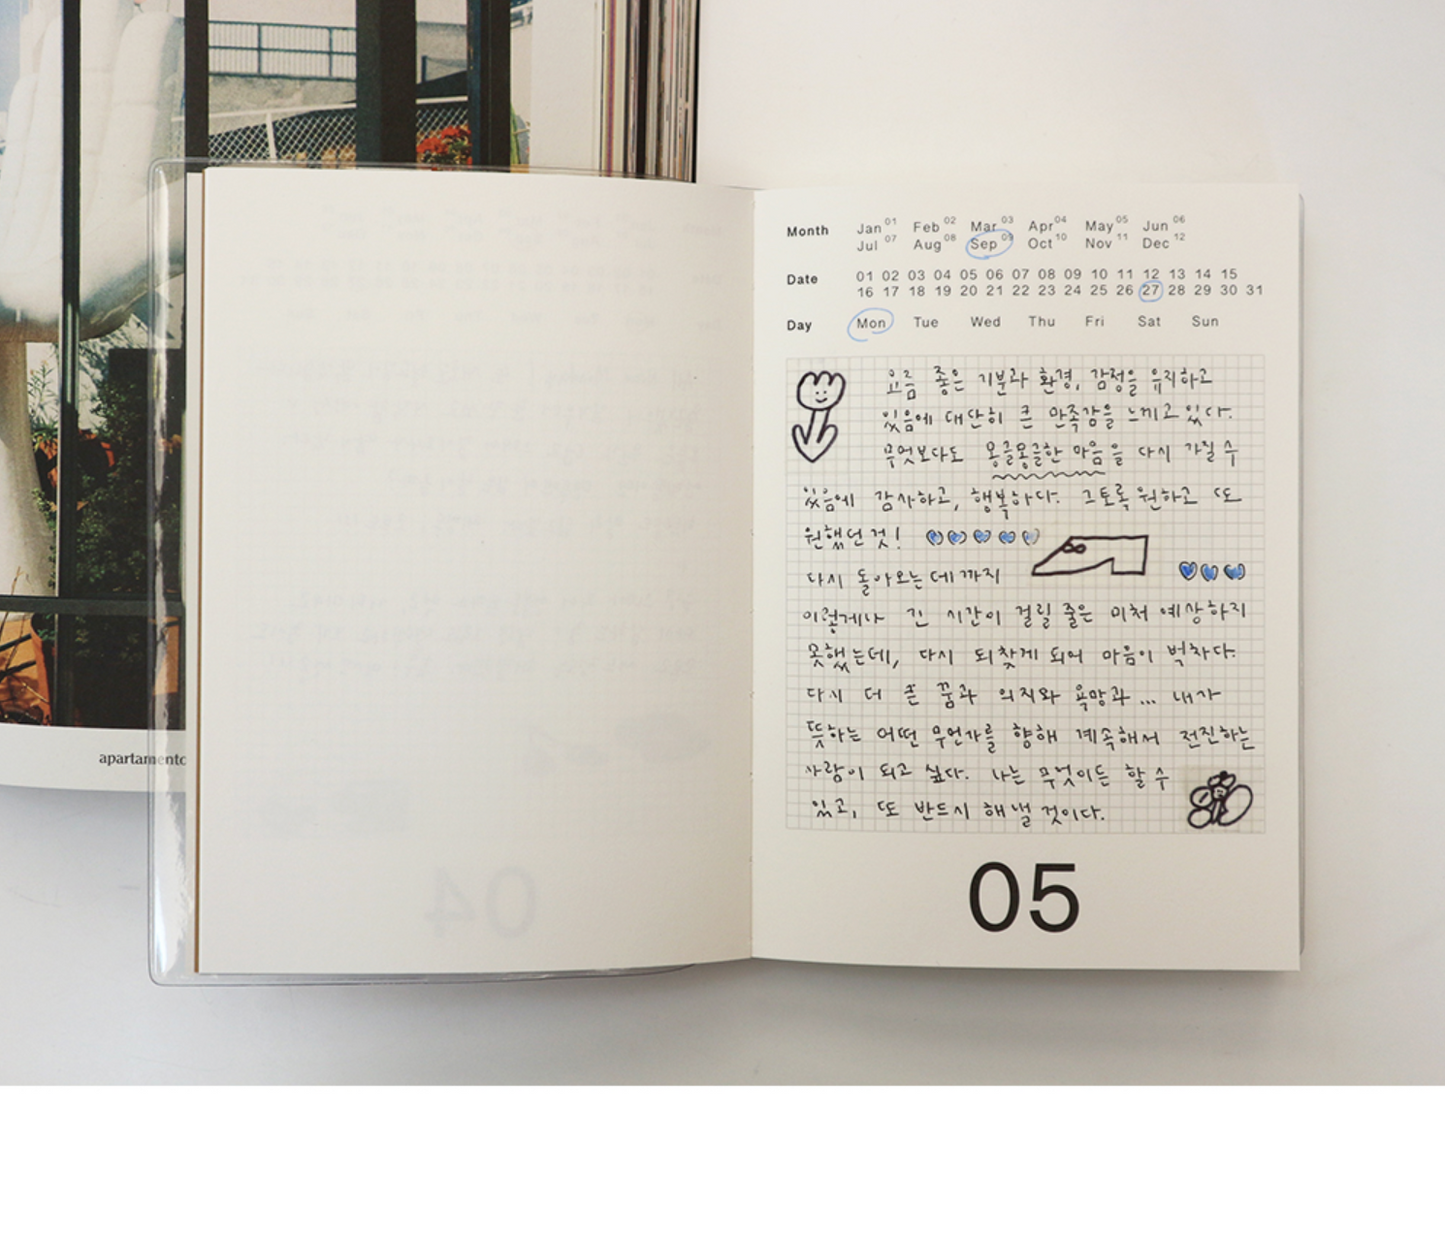 Episode Journal book : Planner Note Journal (Brand: WHENIWASYOUNG)